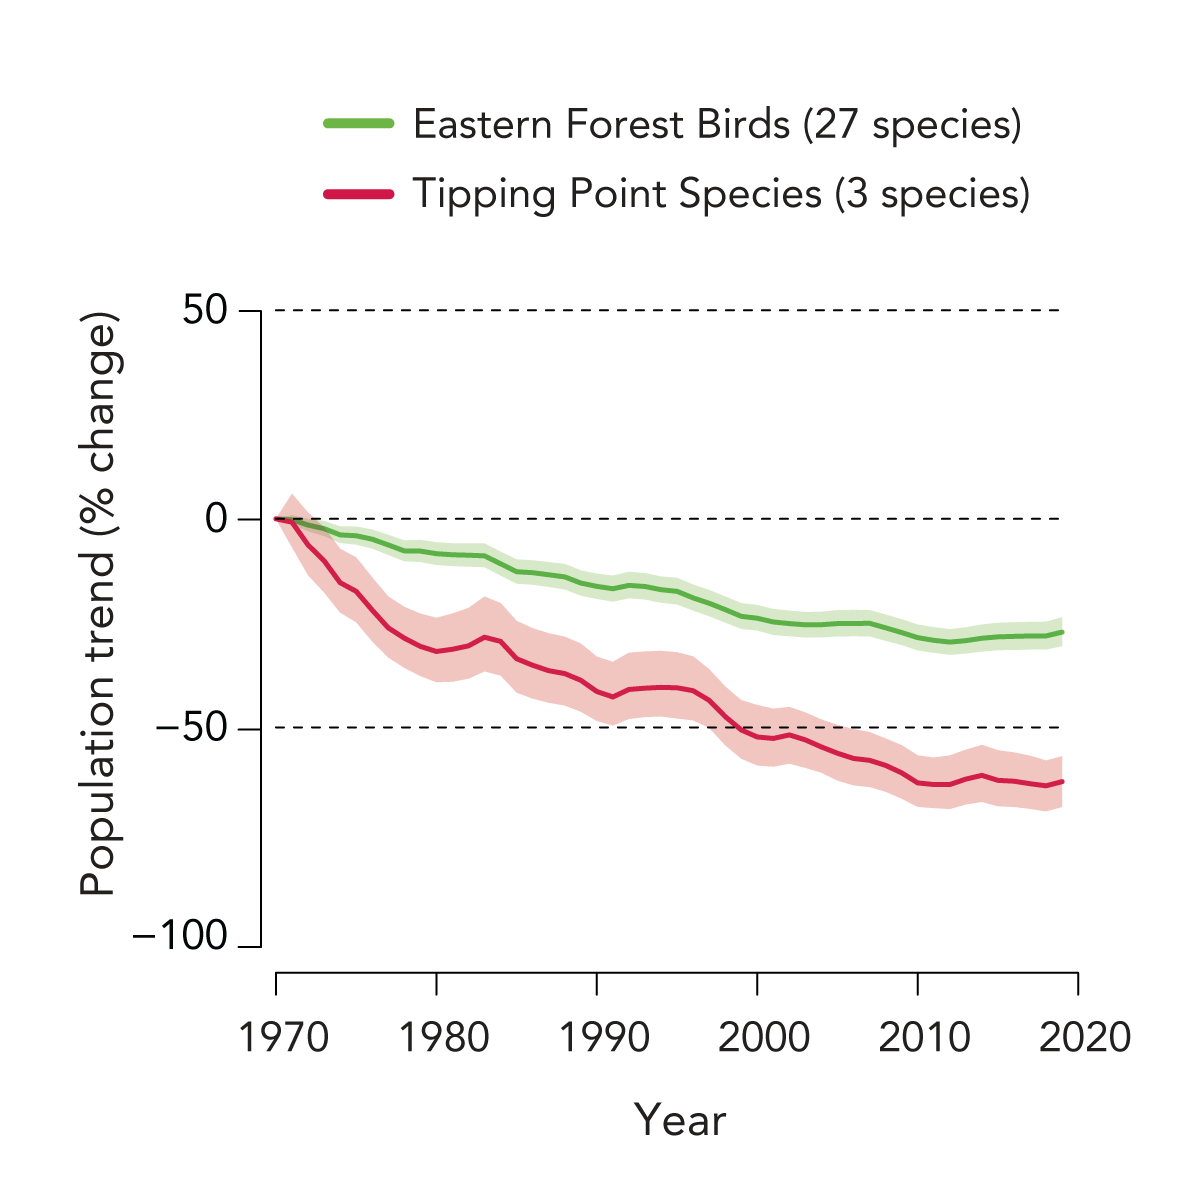 a graph showing declines in 32 species of Eastern Forest Birds, green line, and 3 tipping point species, red line, since 1970